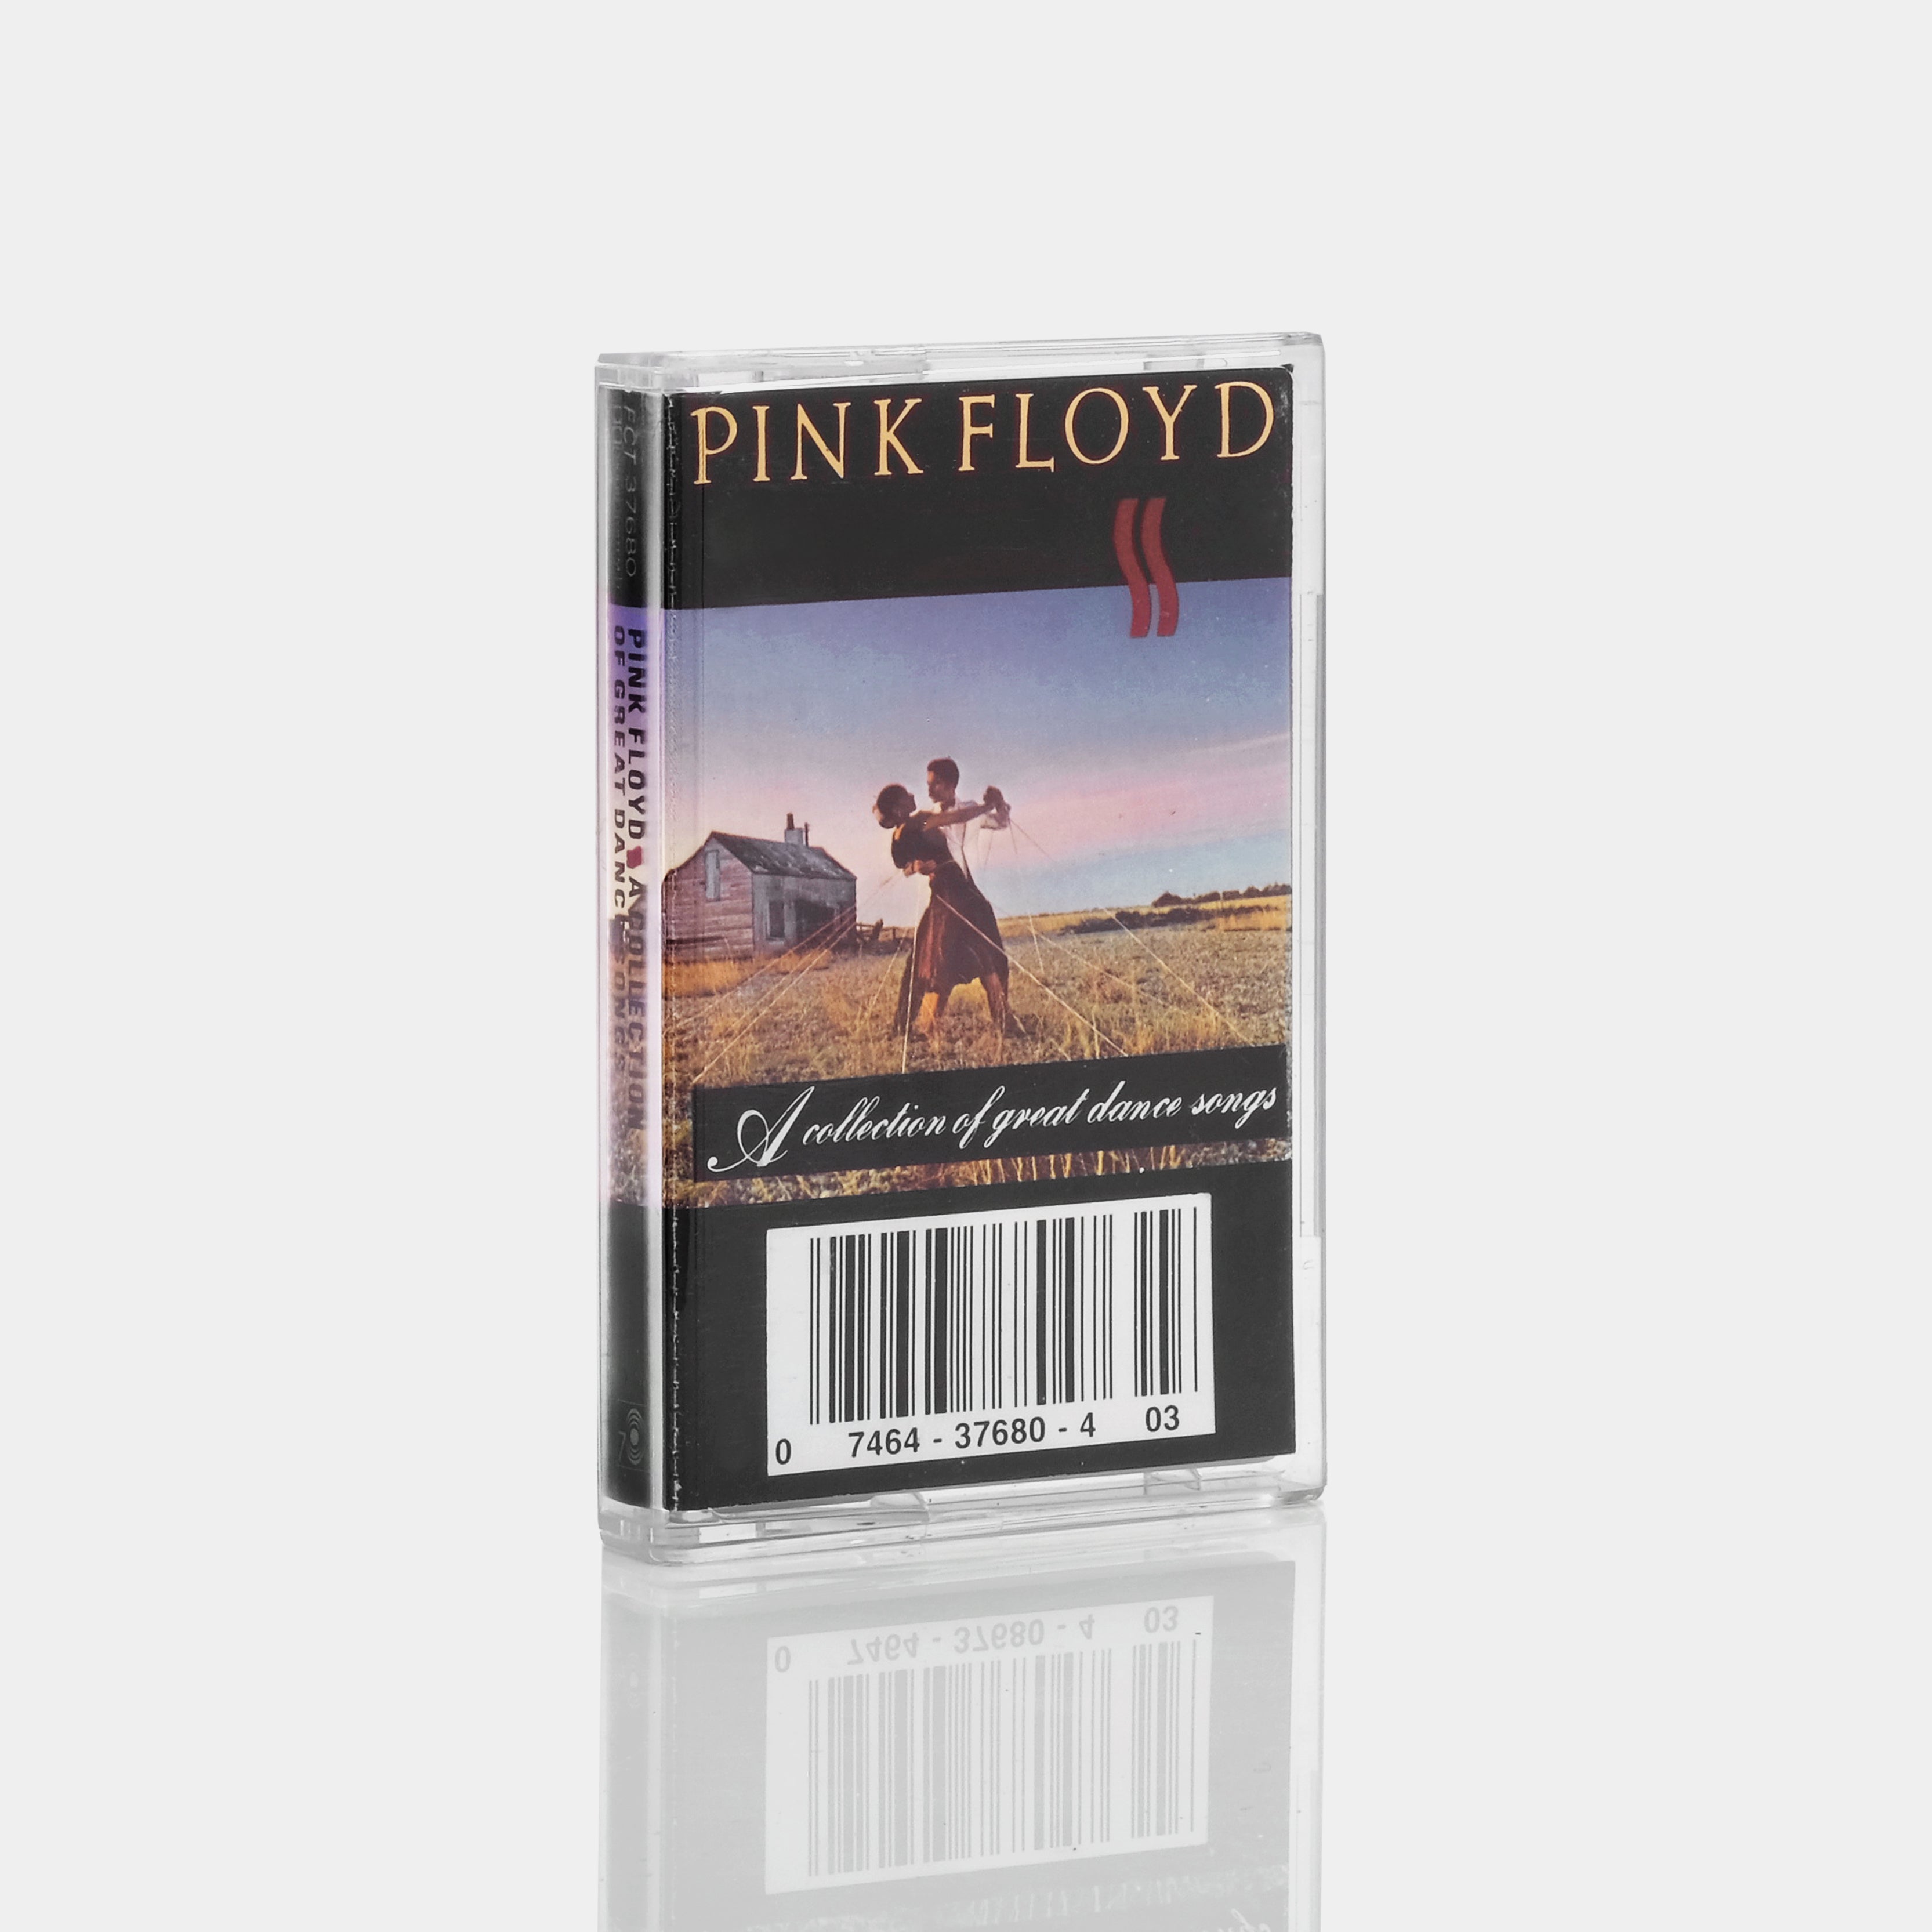 Cassette Collection : r/pinkfloyd